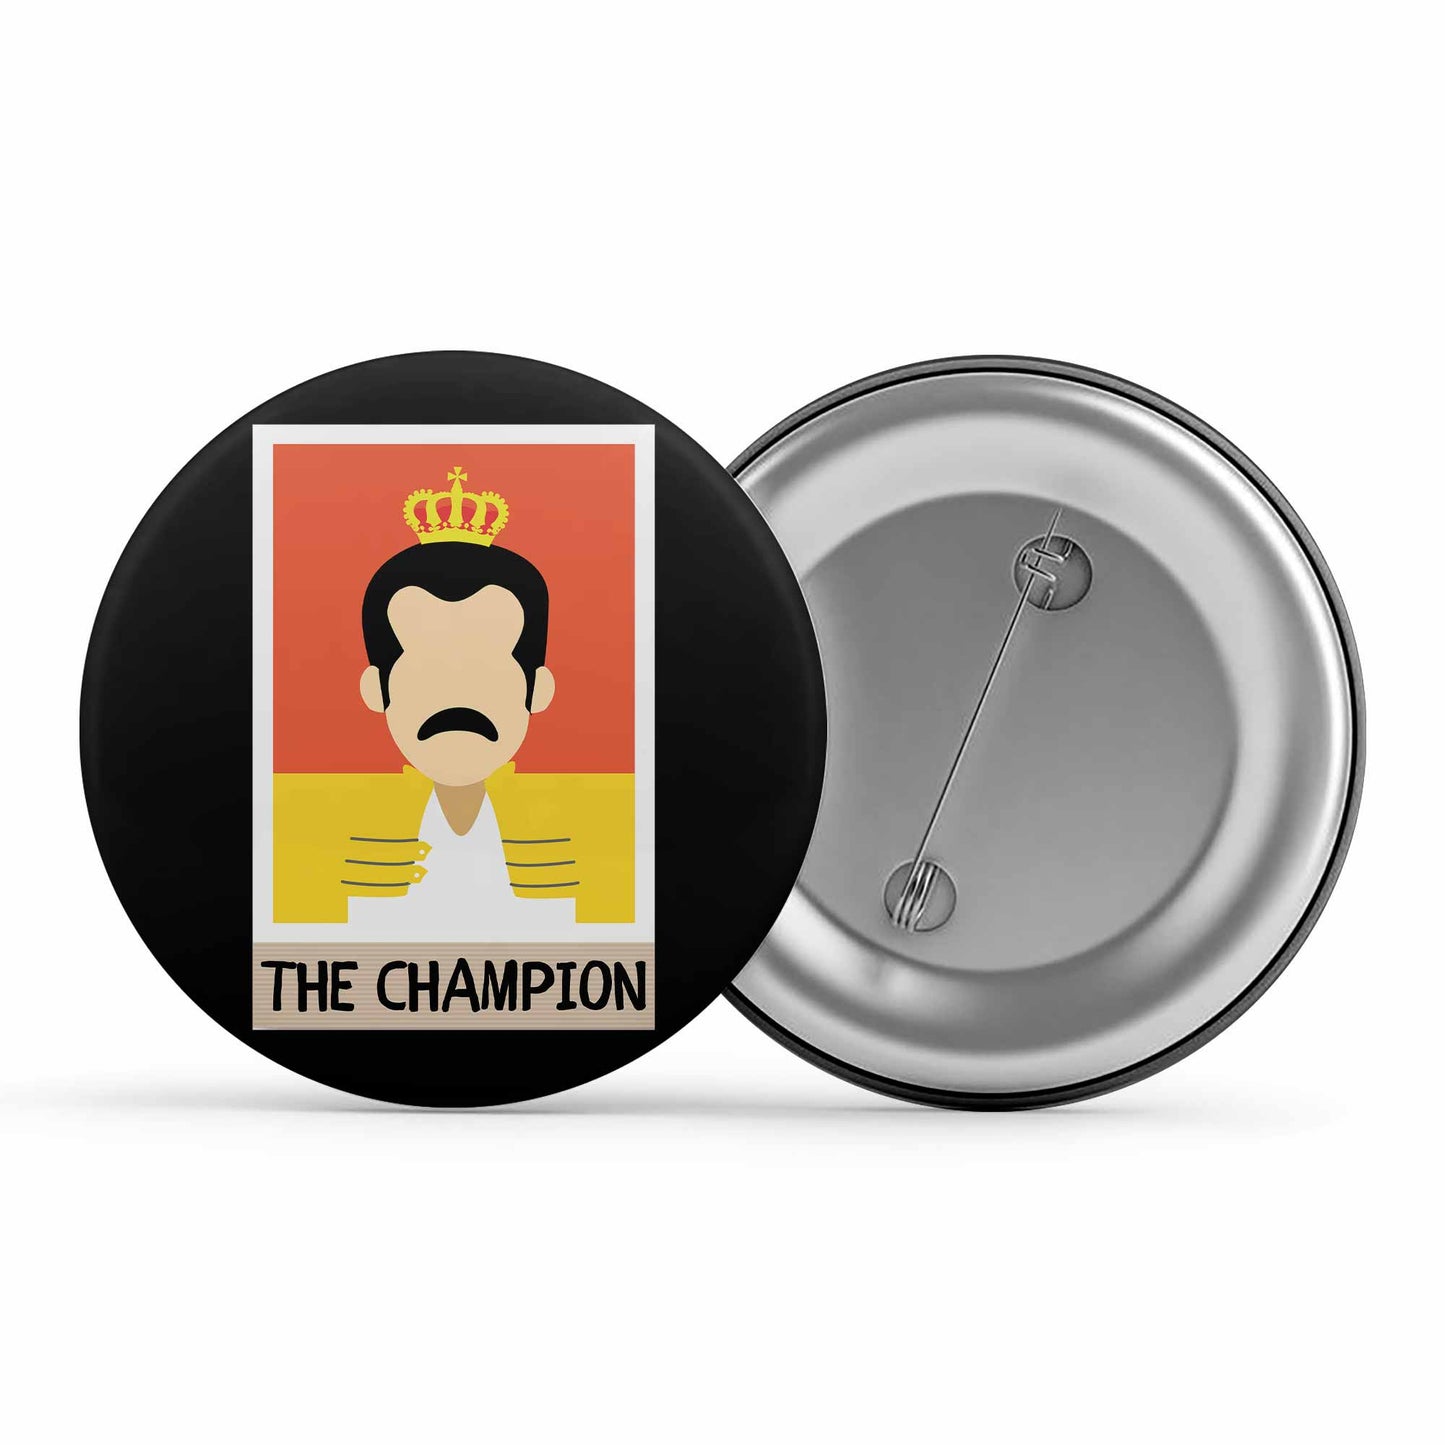 queen the champion badge pin button music band buy online united states of america usa the banyan tee tbt men women girls boys unisex